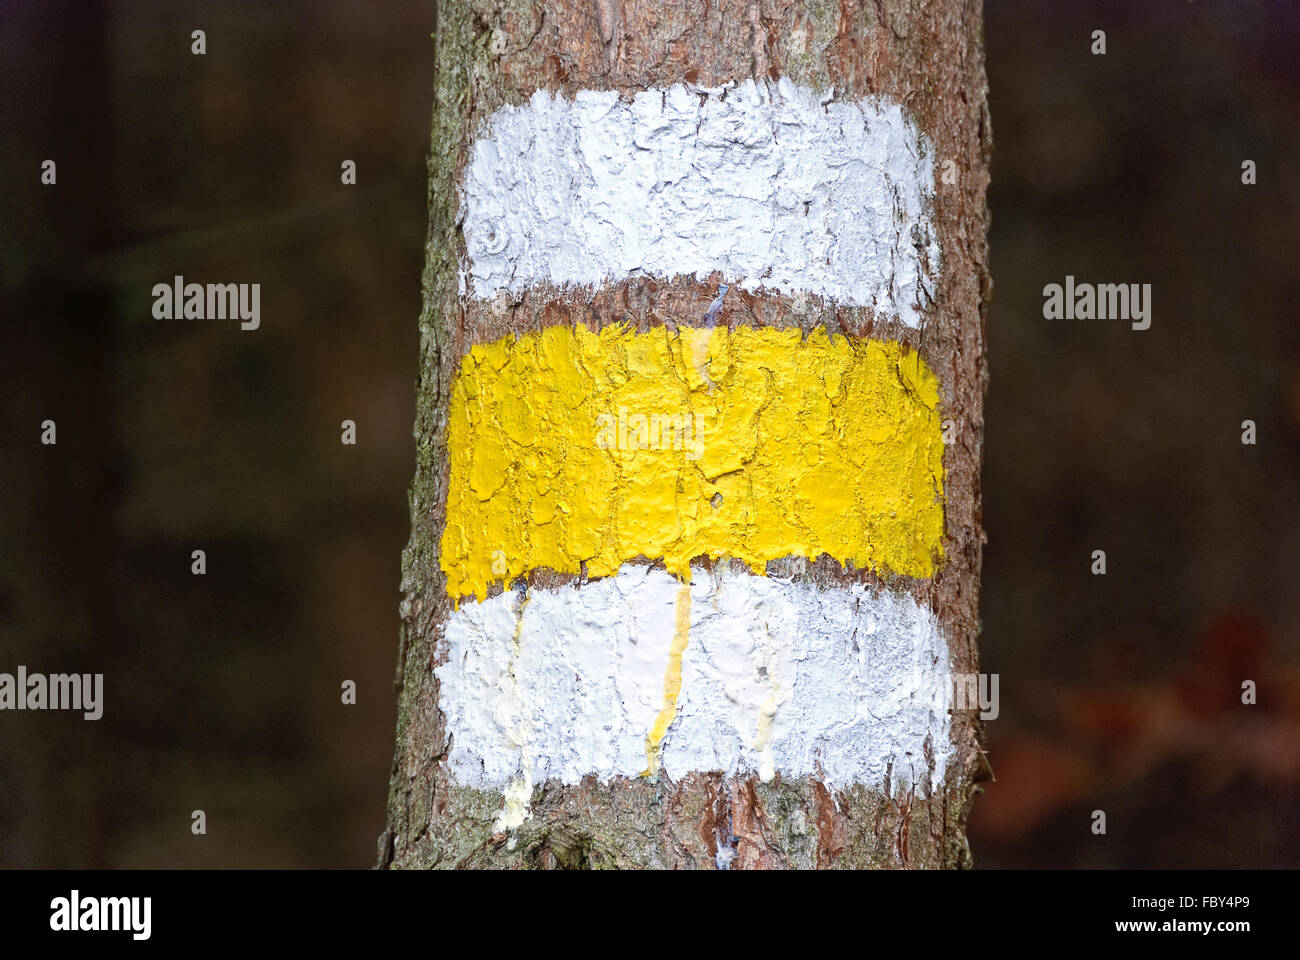 white-yellow-white painted marker on a tree Stock Photo